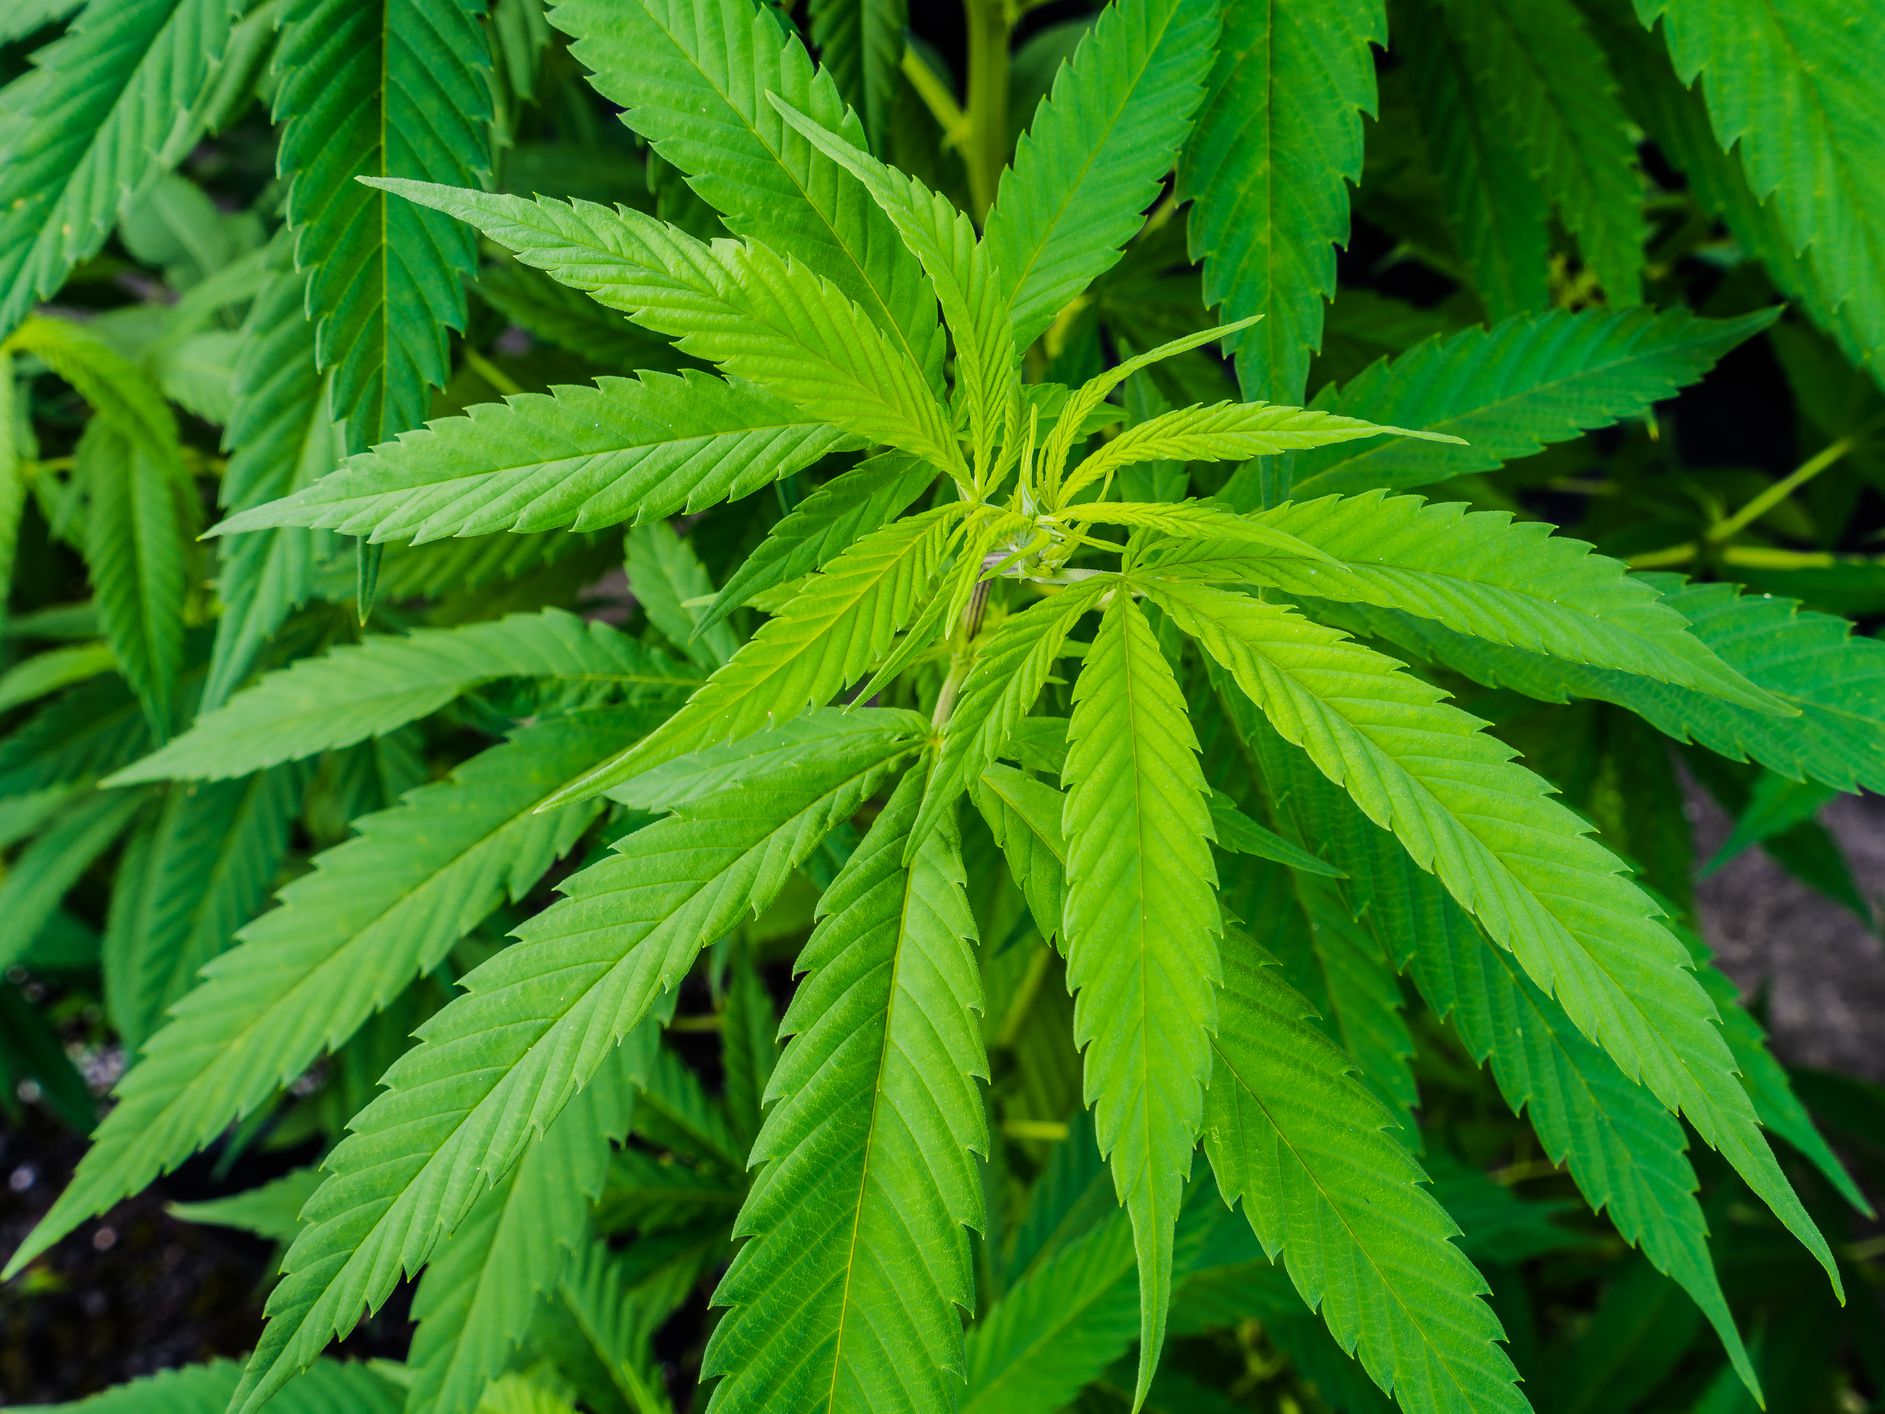 At 34% CAGR Rise, Global Industrial Hemp Market Size Value Anticipated USD 36 Billion by 2026: Report by Facts & Factors